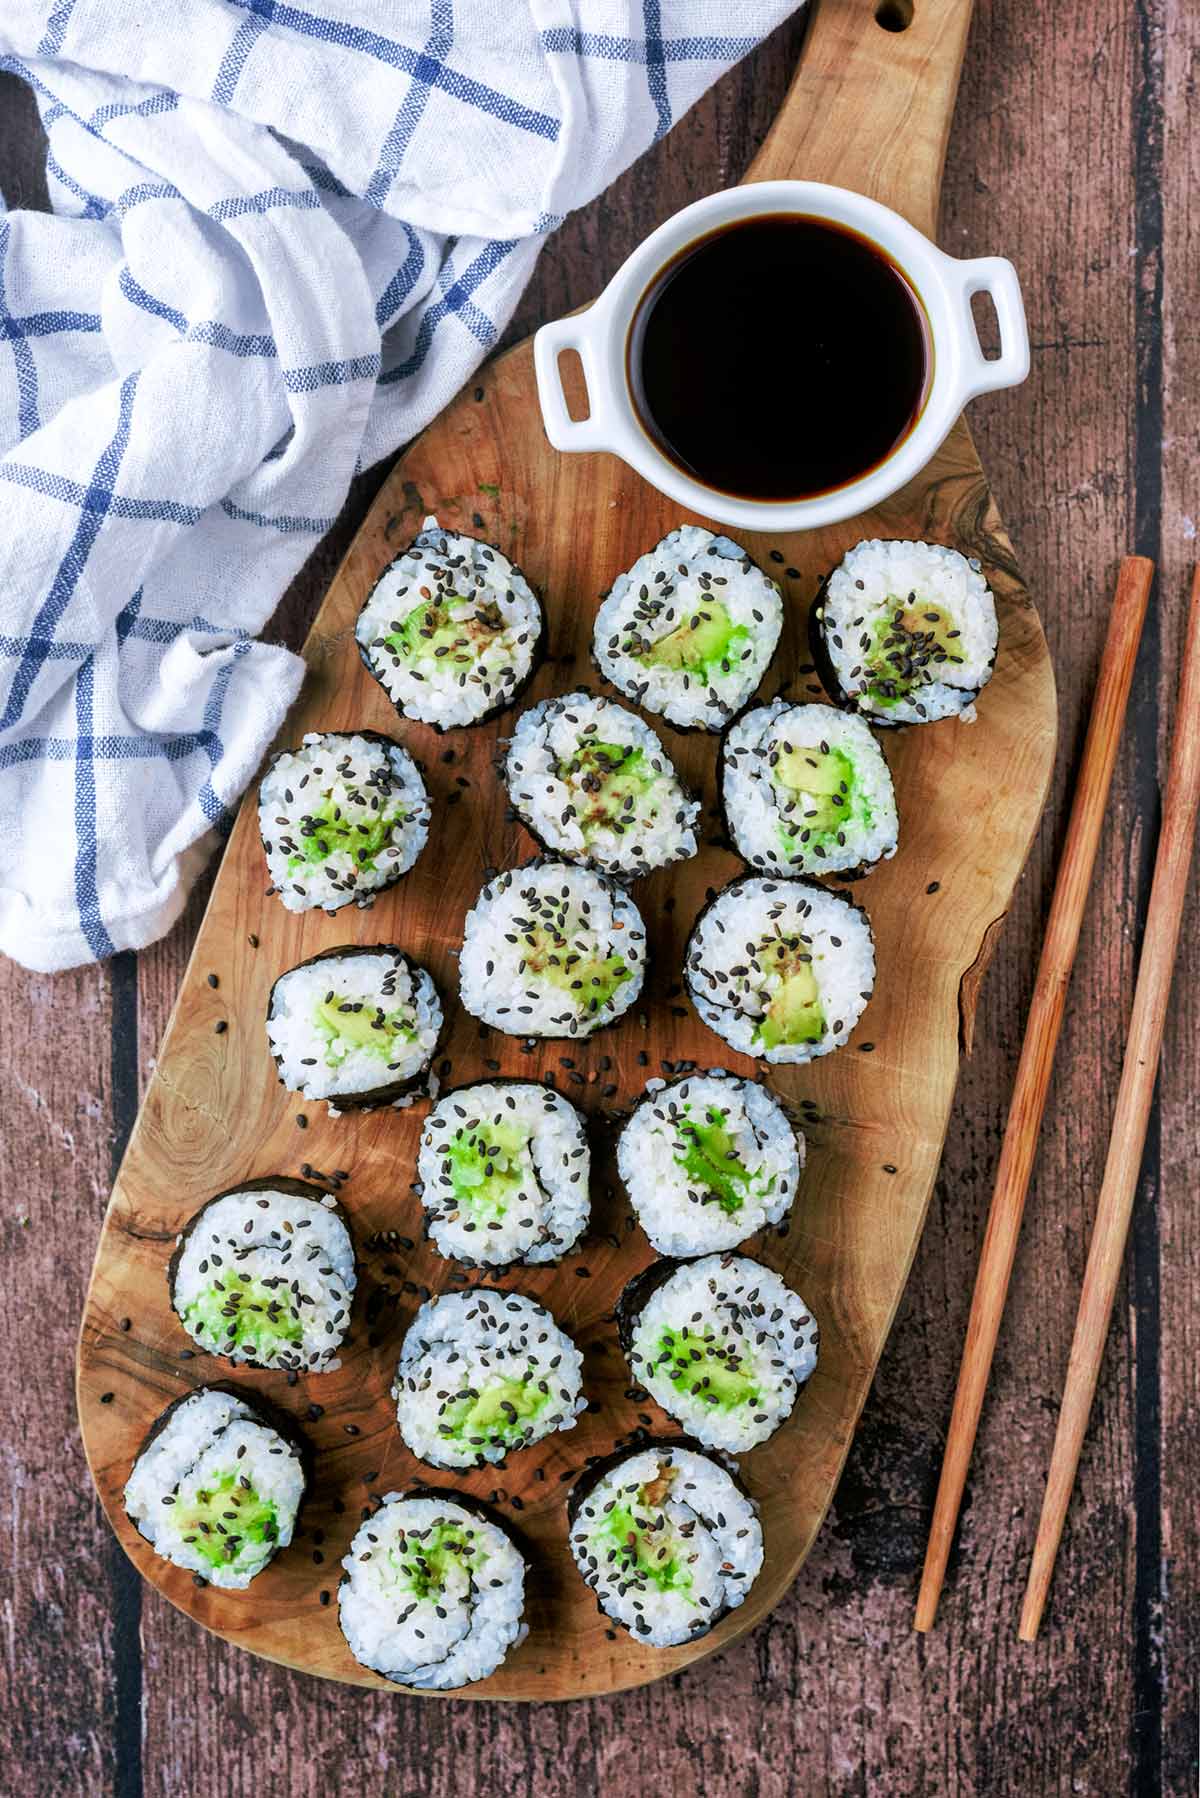 Avocado sushi rolls on a wooden board with a small bowl of soy sauce.